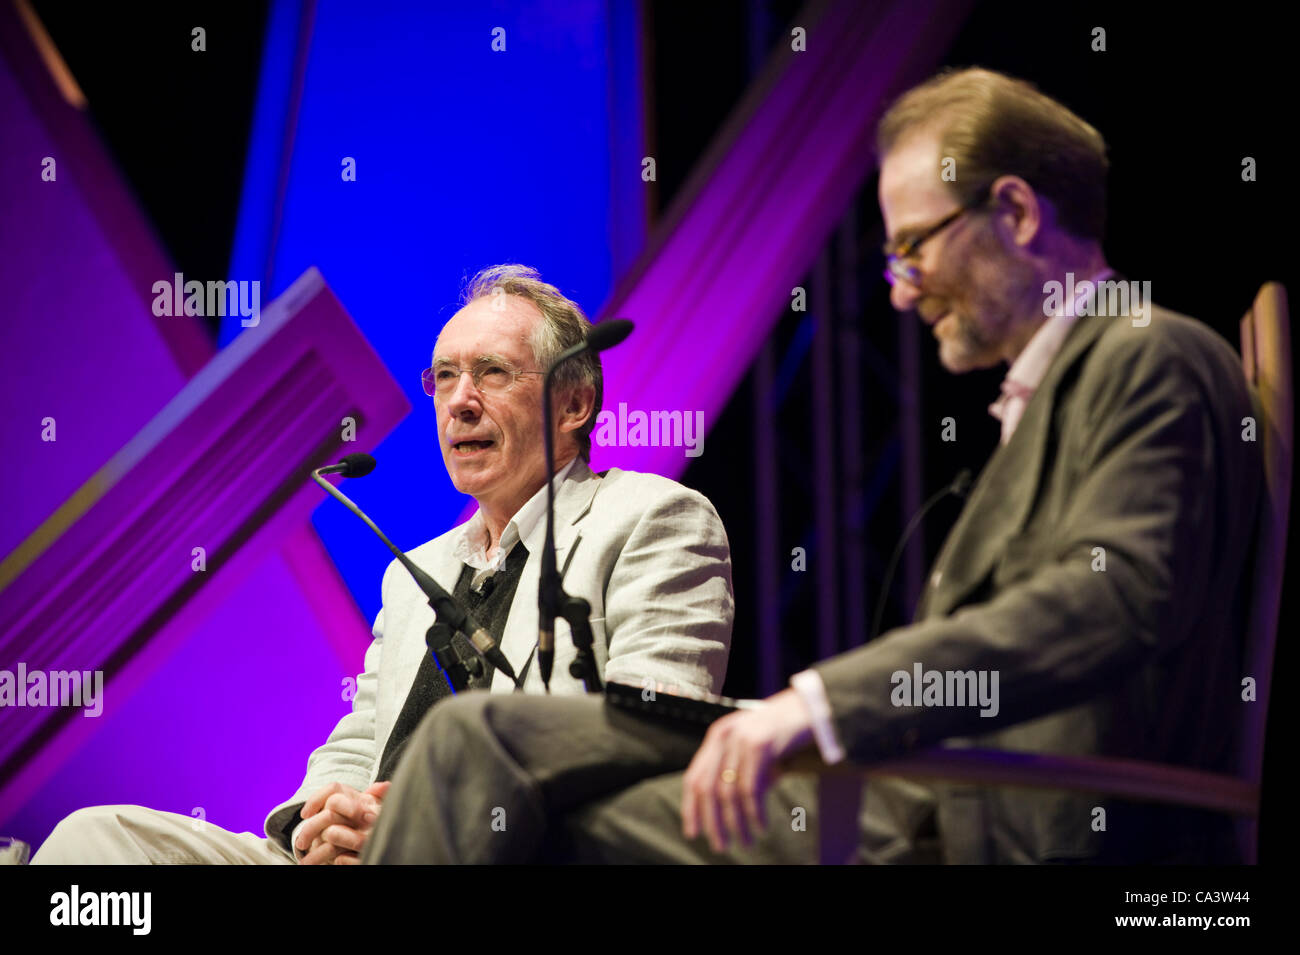 Ian McEwan speaking about his forthcoming MI5 novel 'Sweet Tooth' at The Telegraph Hay Festival 2012, Hay-on-Wye, Powys Wales UK Stock Photo